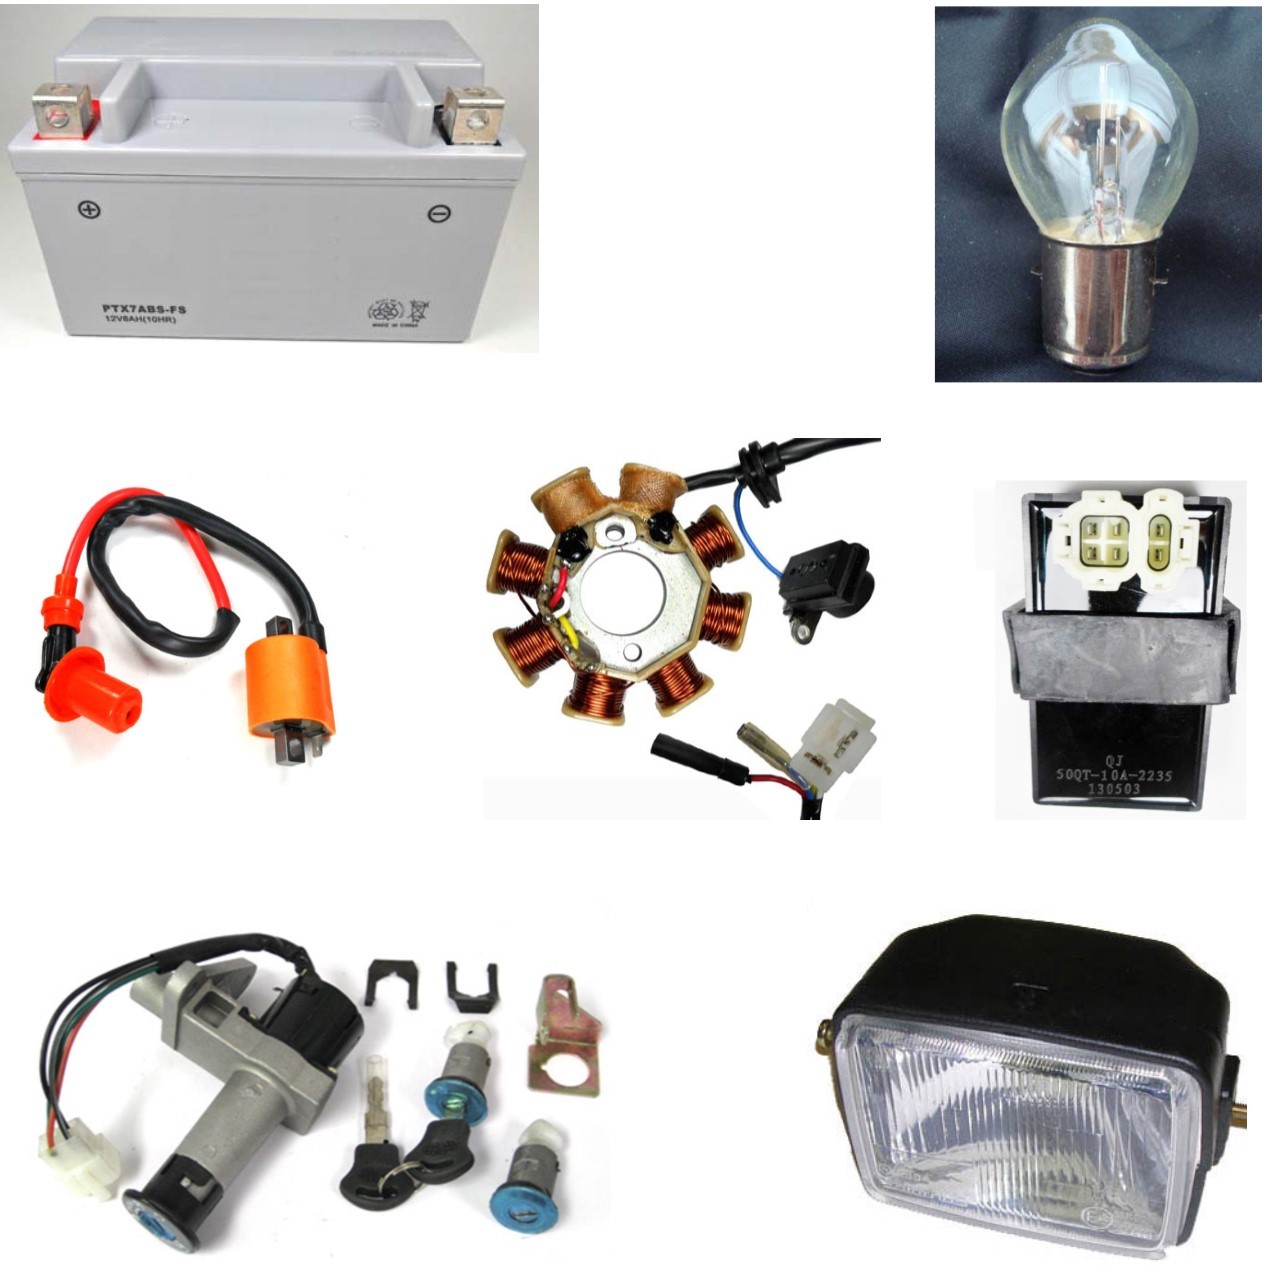 Electrical Parts, Switches Lights, Bulbs, Stators, CDIs, + More